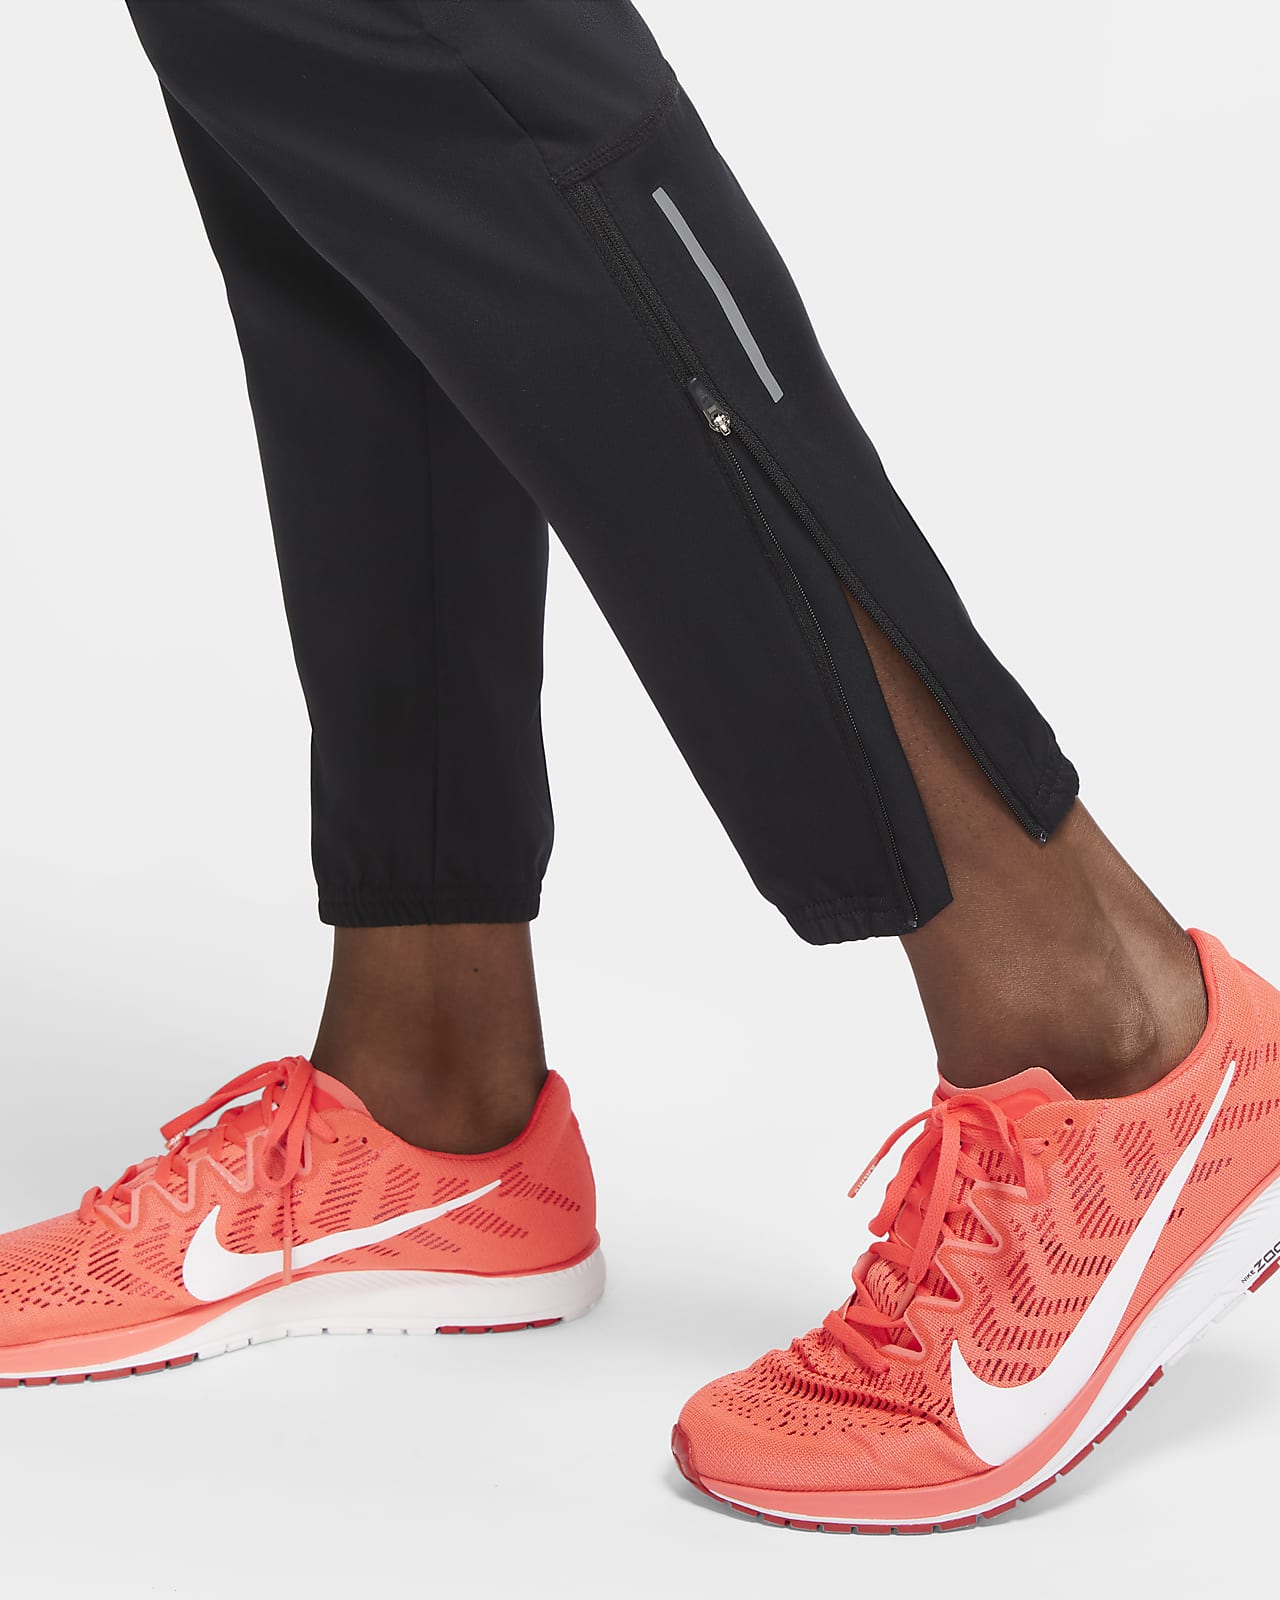 nike essential woven running track pants